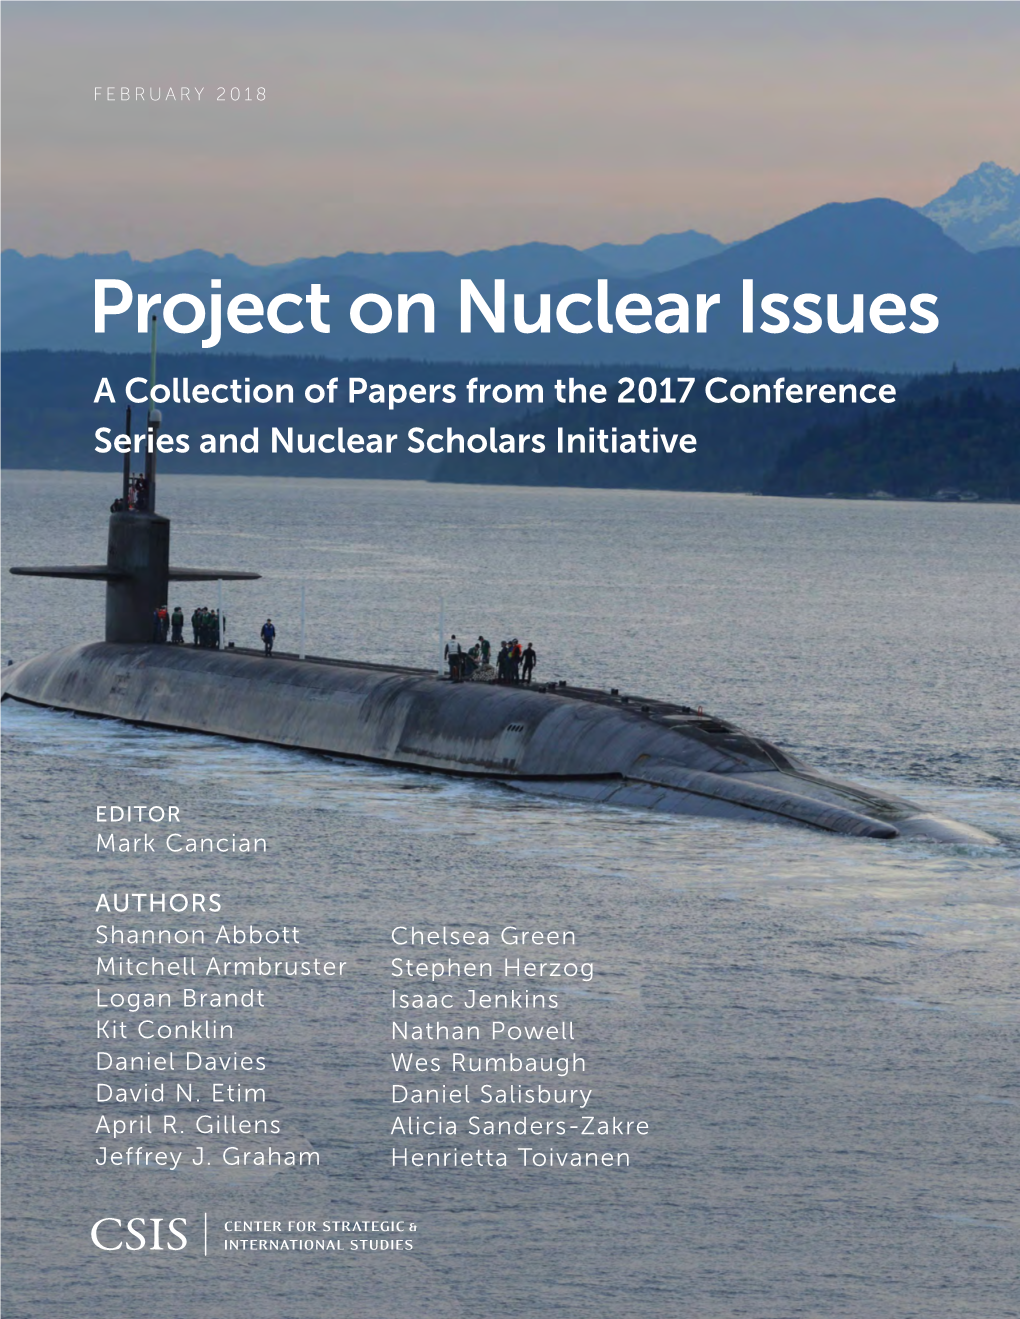 A Collection of Papers from the 2017 Conference Series and Nuclear Scholars Initiative